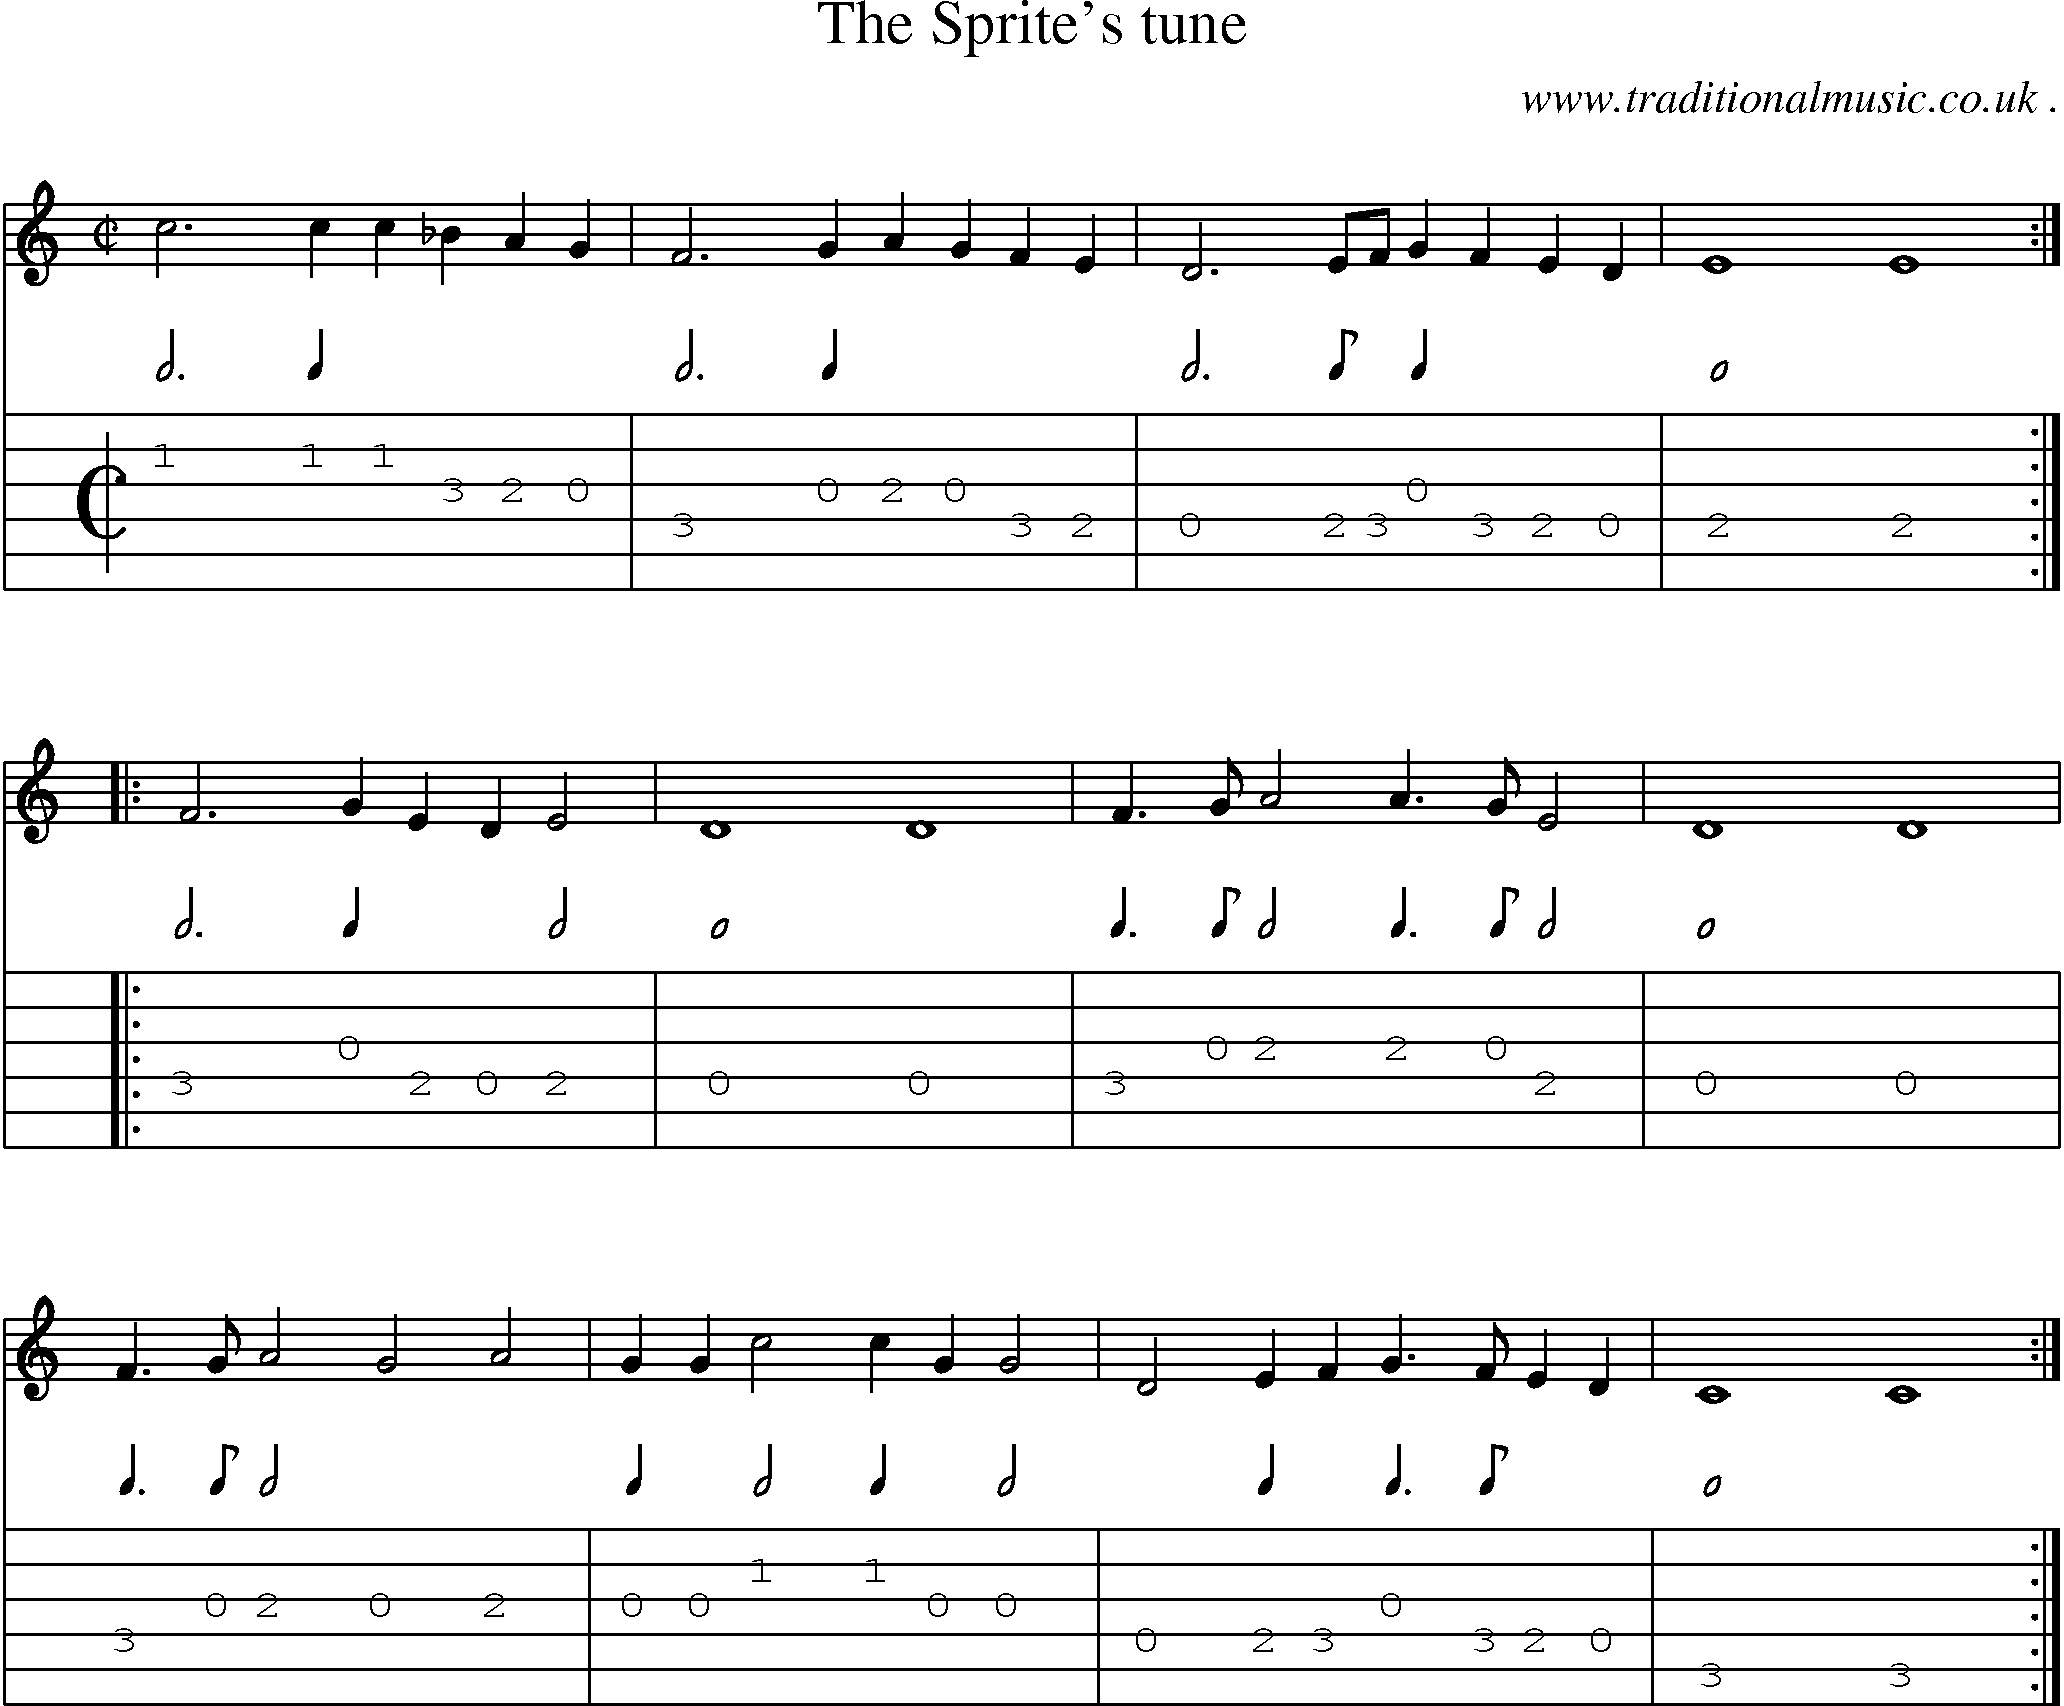 Sheet-Music and Guitar Tabs for The Sprites Tune